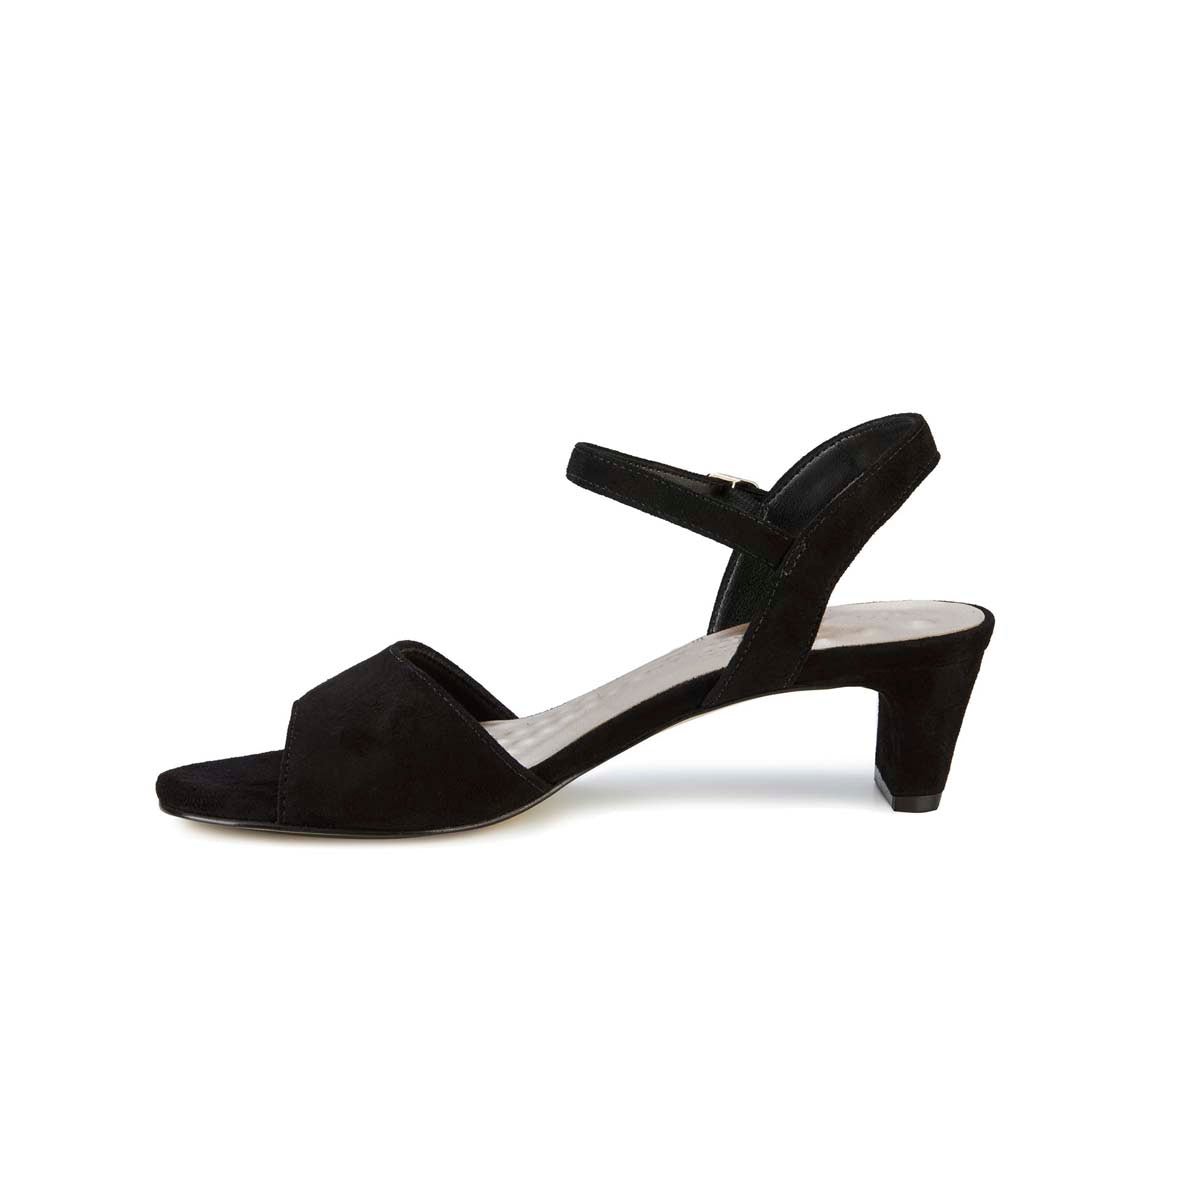 ROS HOMMERSON LYDIA WOMEN ADJUSTABLE BUCKLE STRAP SANDAL IN BLACK SUEDE - TLW Shoes